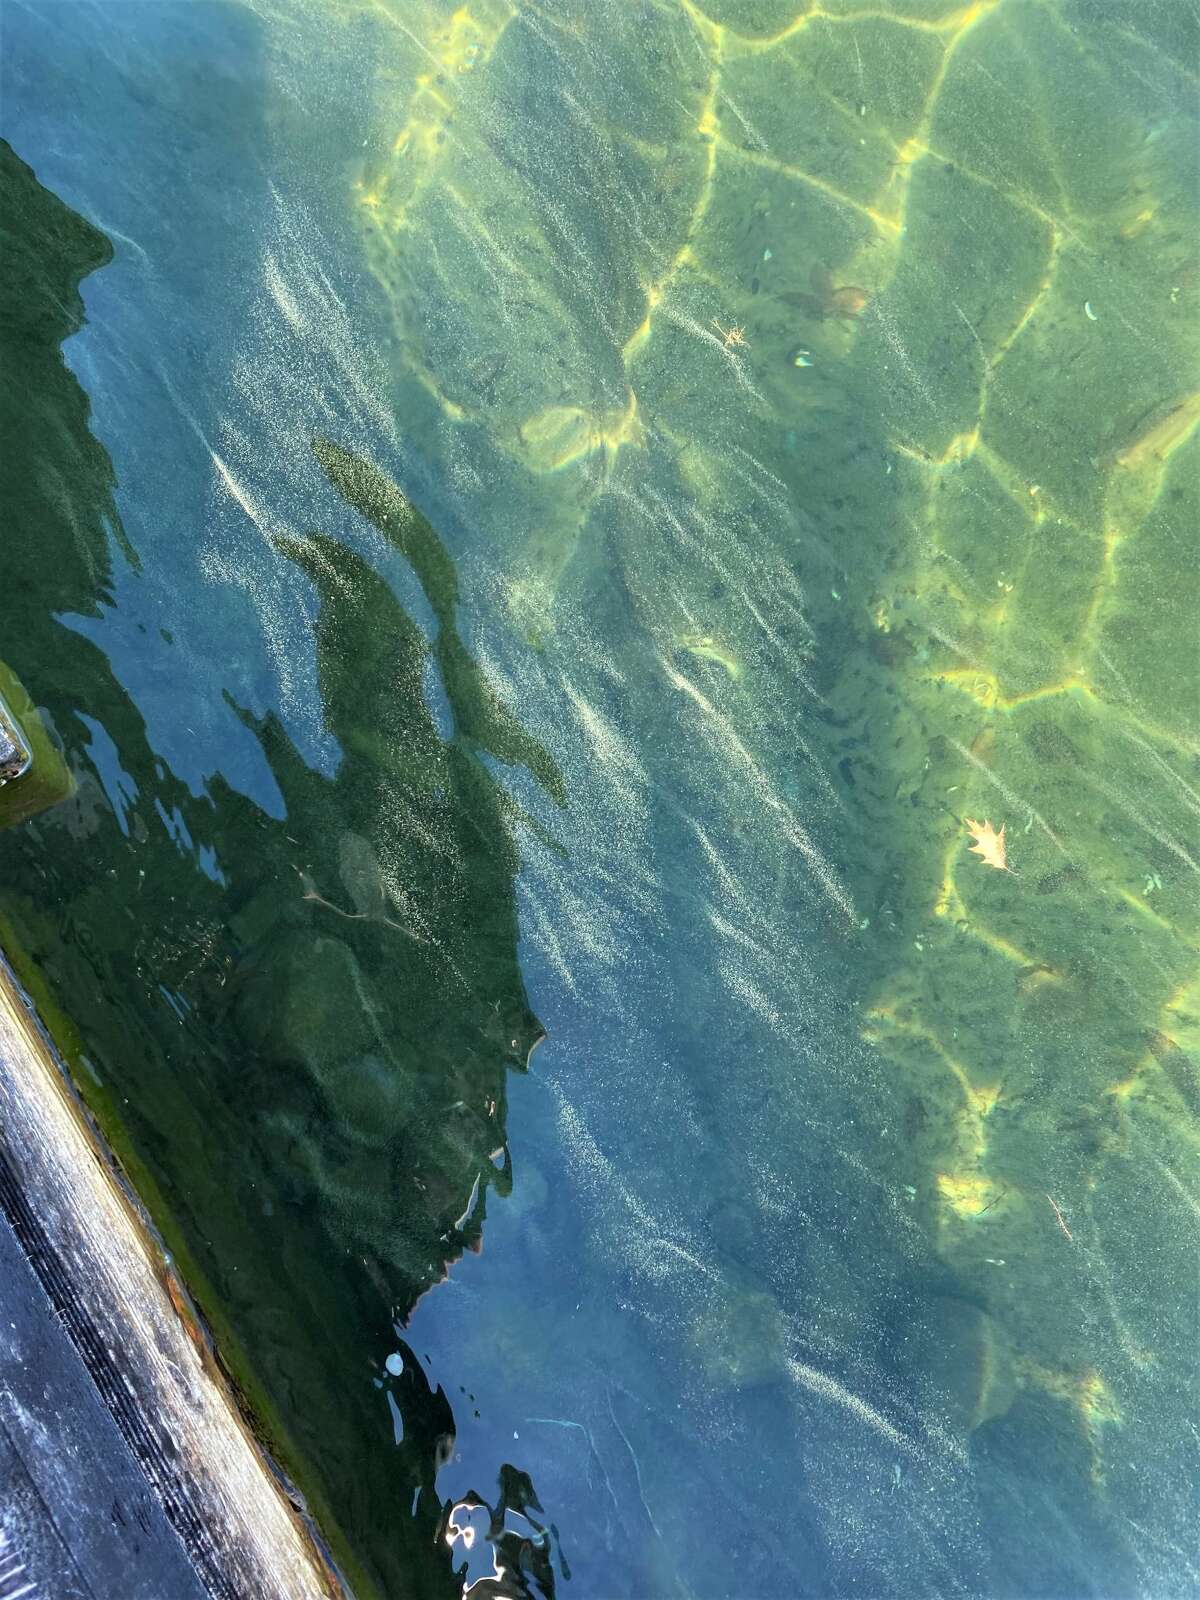 Two sections of Lake George grappled with algal blooms in the fall of 2020. (Photo courtesy Adirondack Explorer)